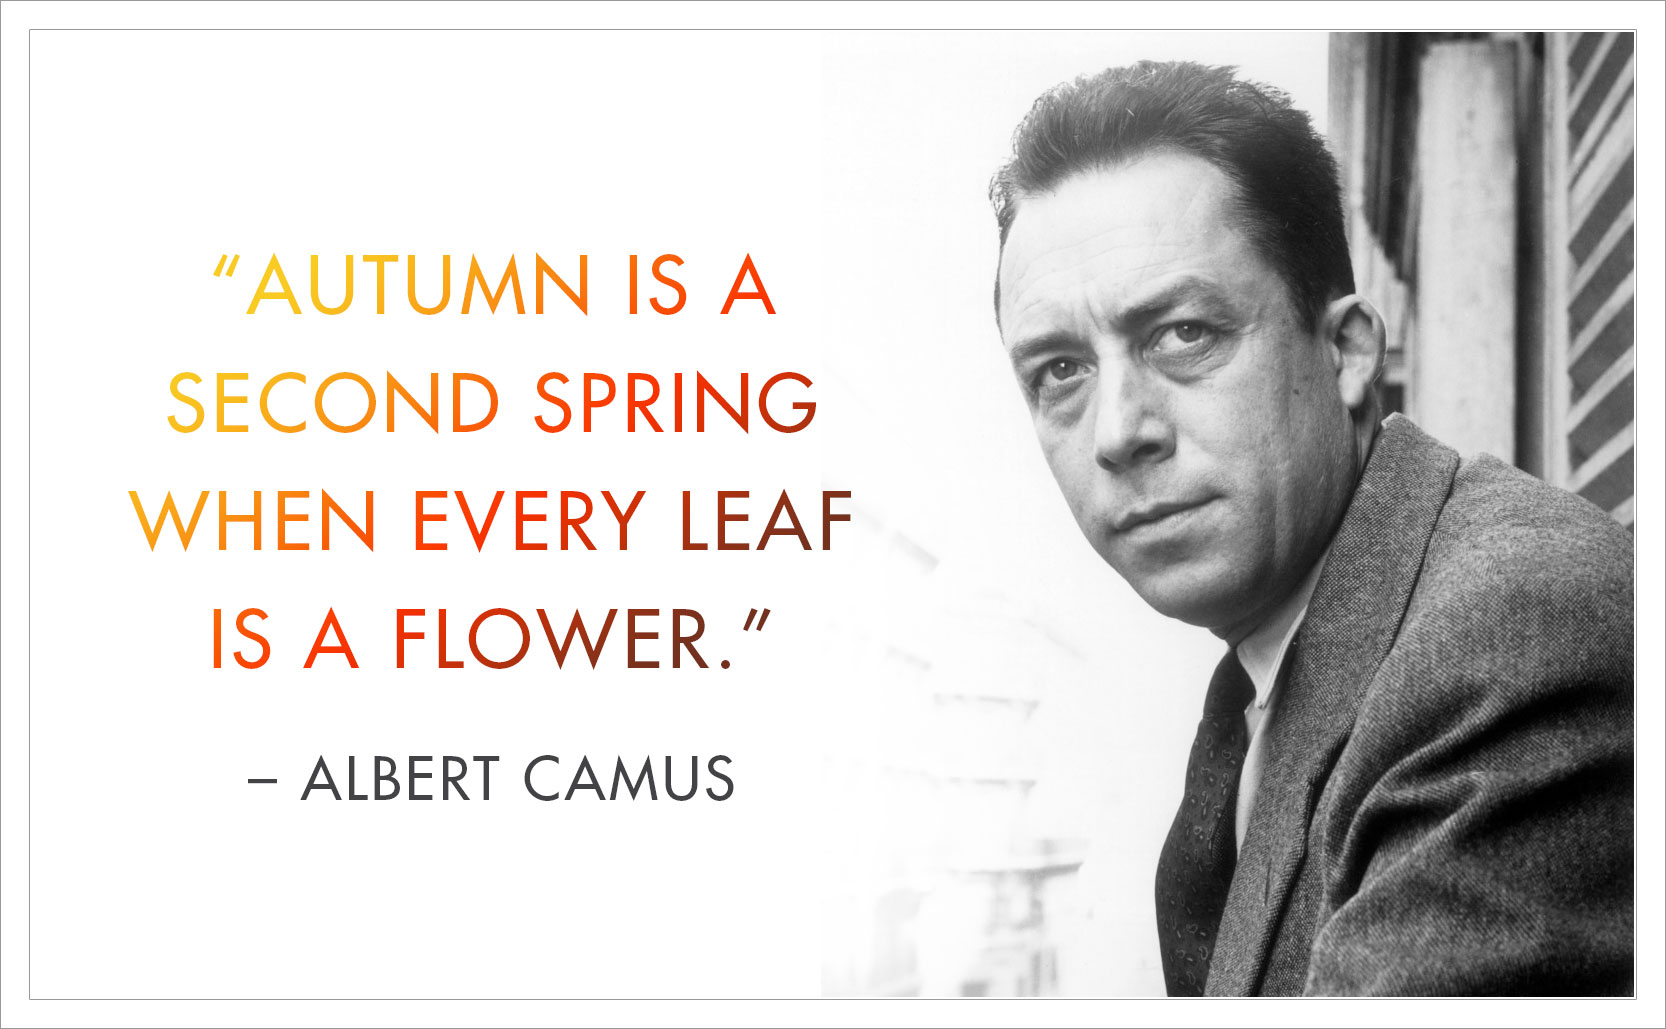 “Autumn is a second spring when every leaf is a flower.” ― Albert Camus